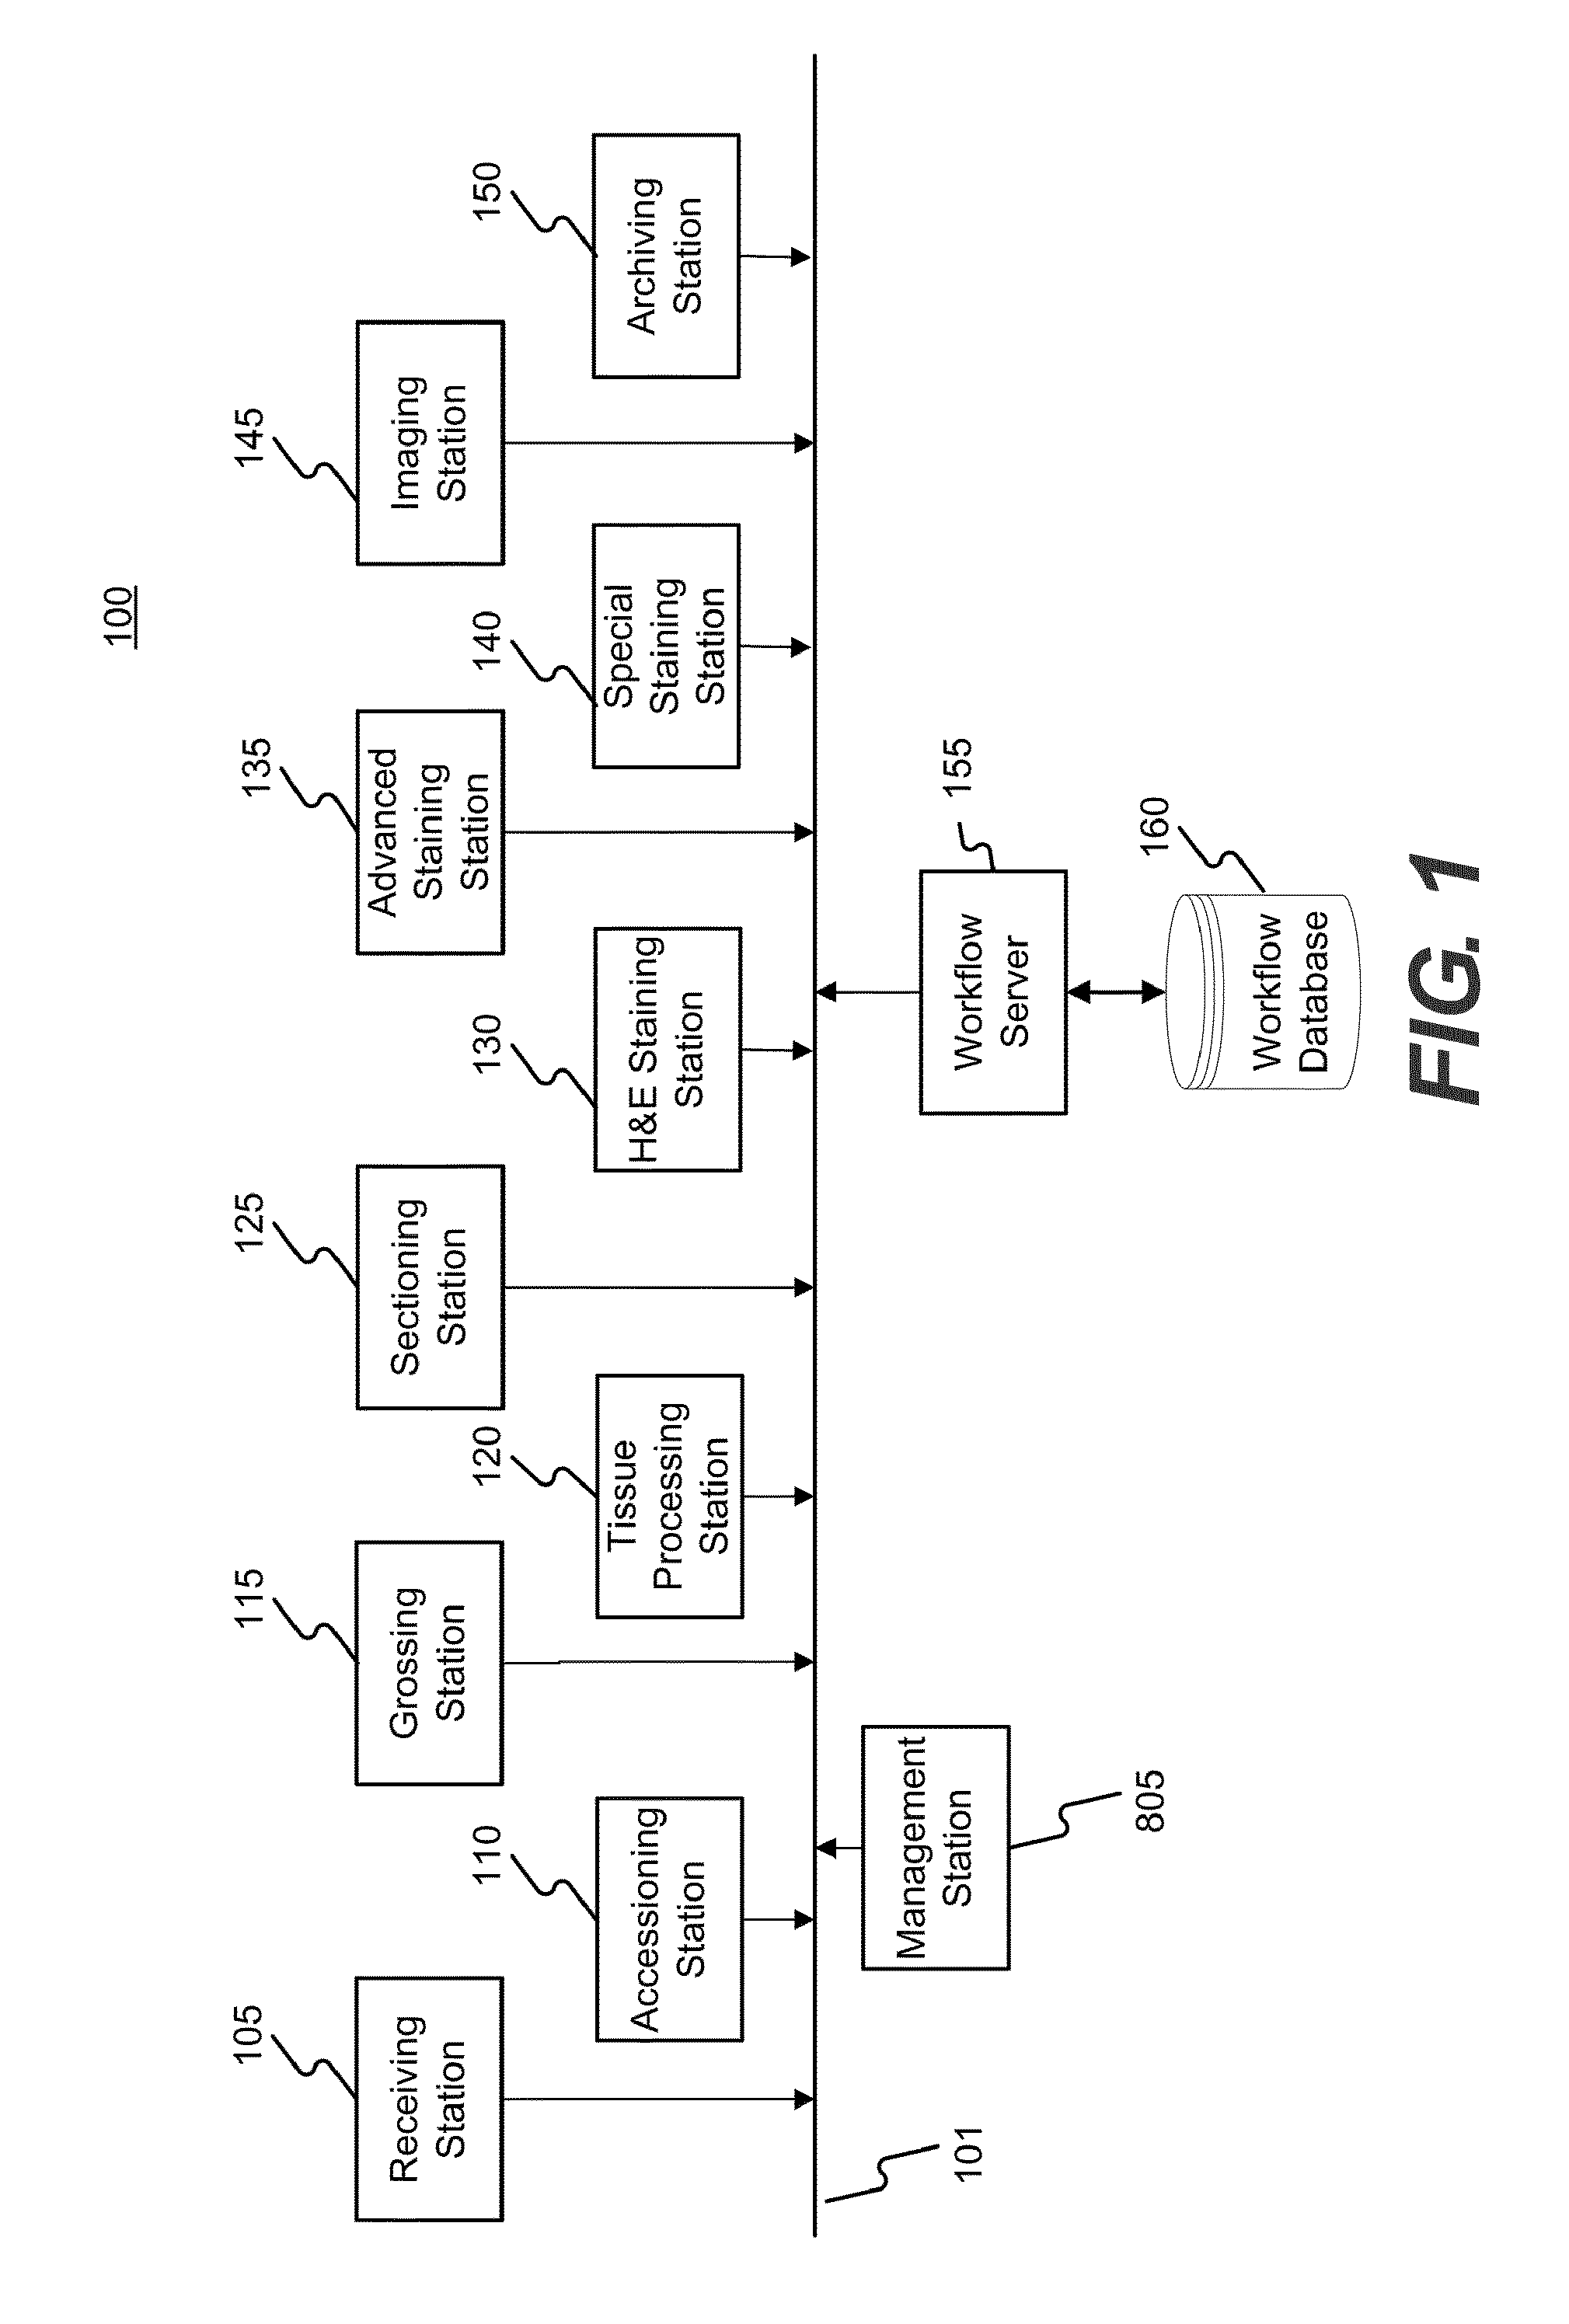 Systems and methods for tracking and providing workflow information